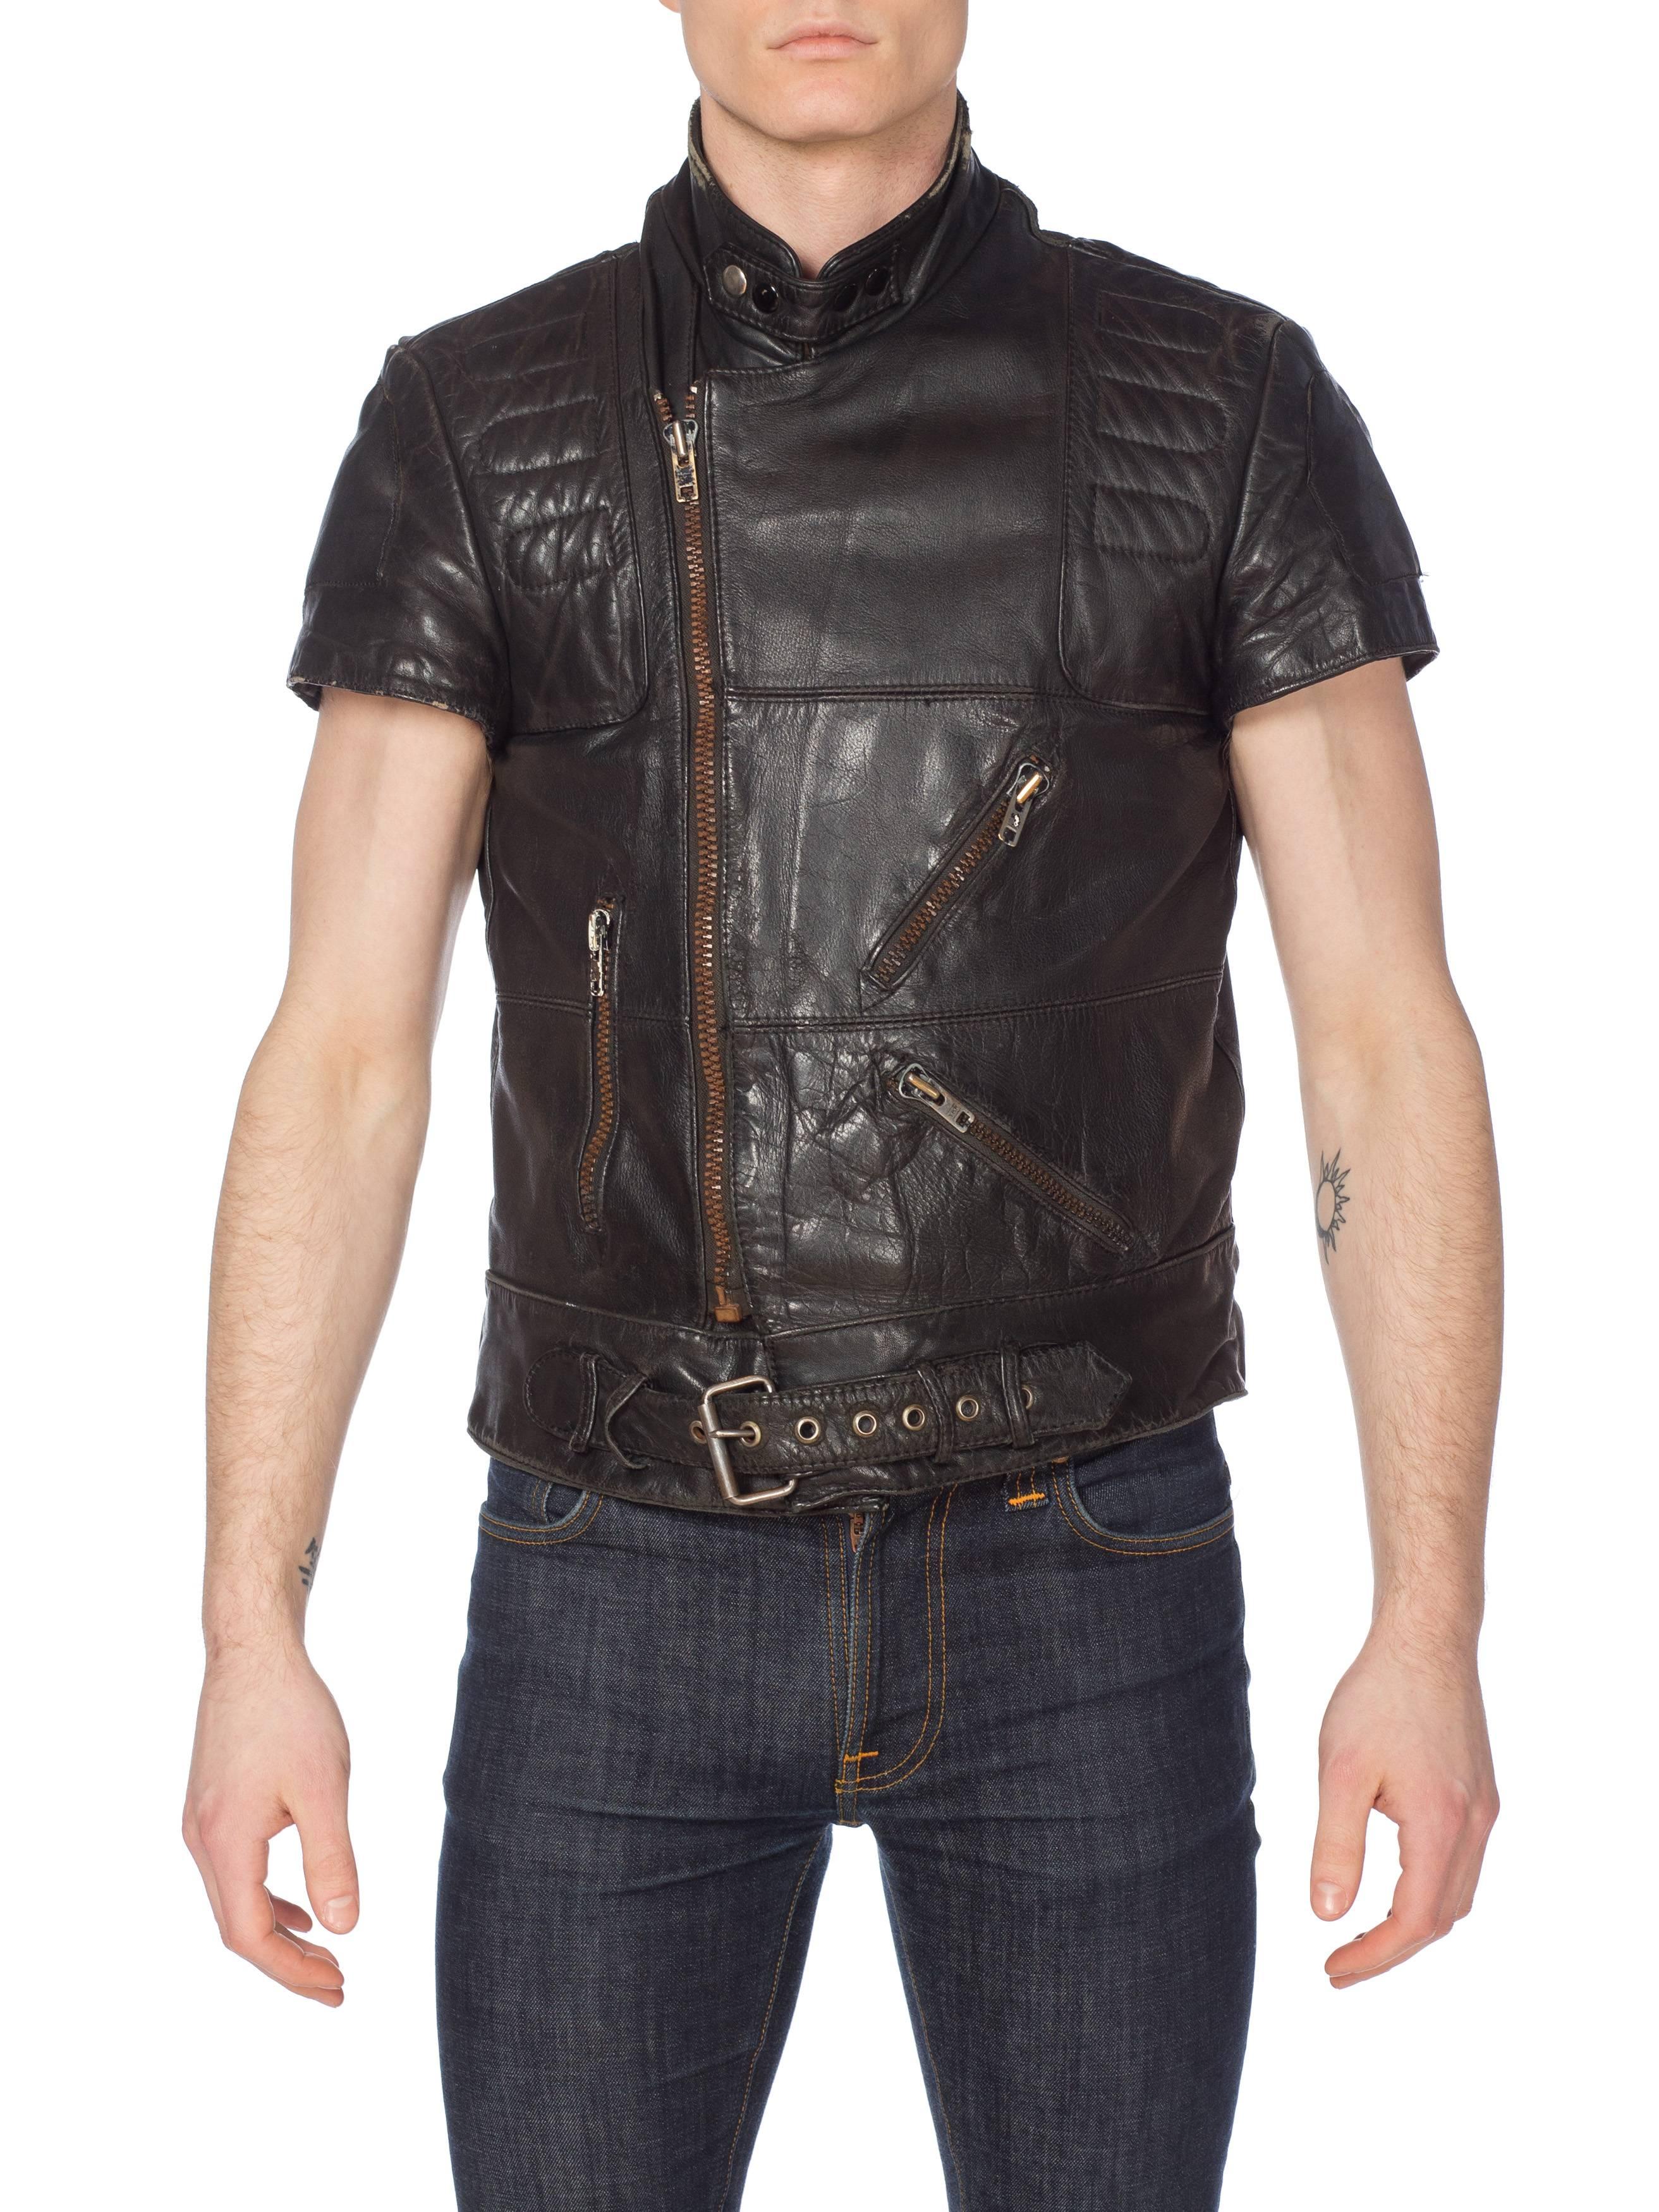 Mens Cropped Sleeve Leather Biker Jacket Formerly Belonging to the Band Justice 11